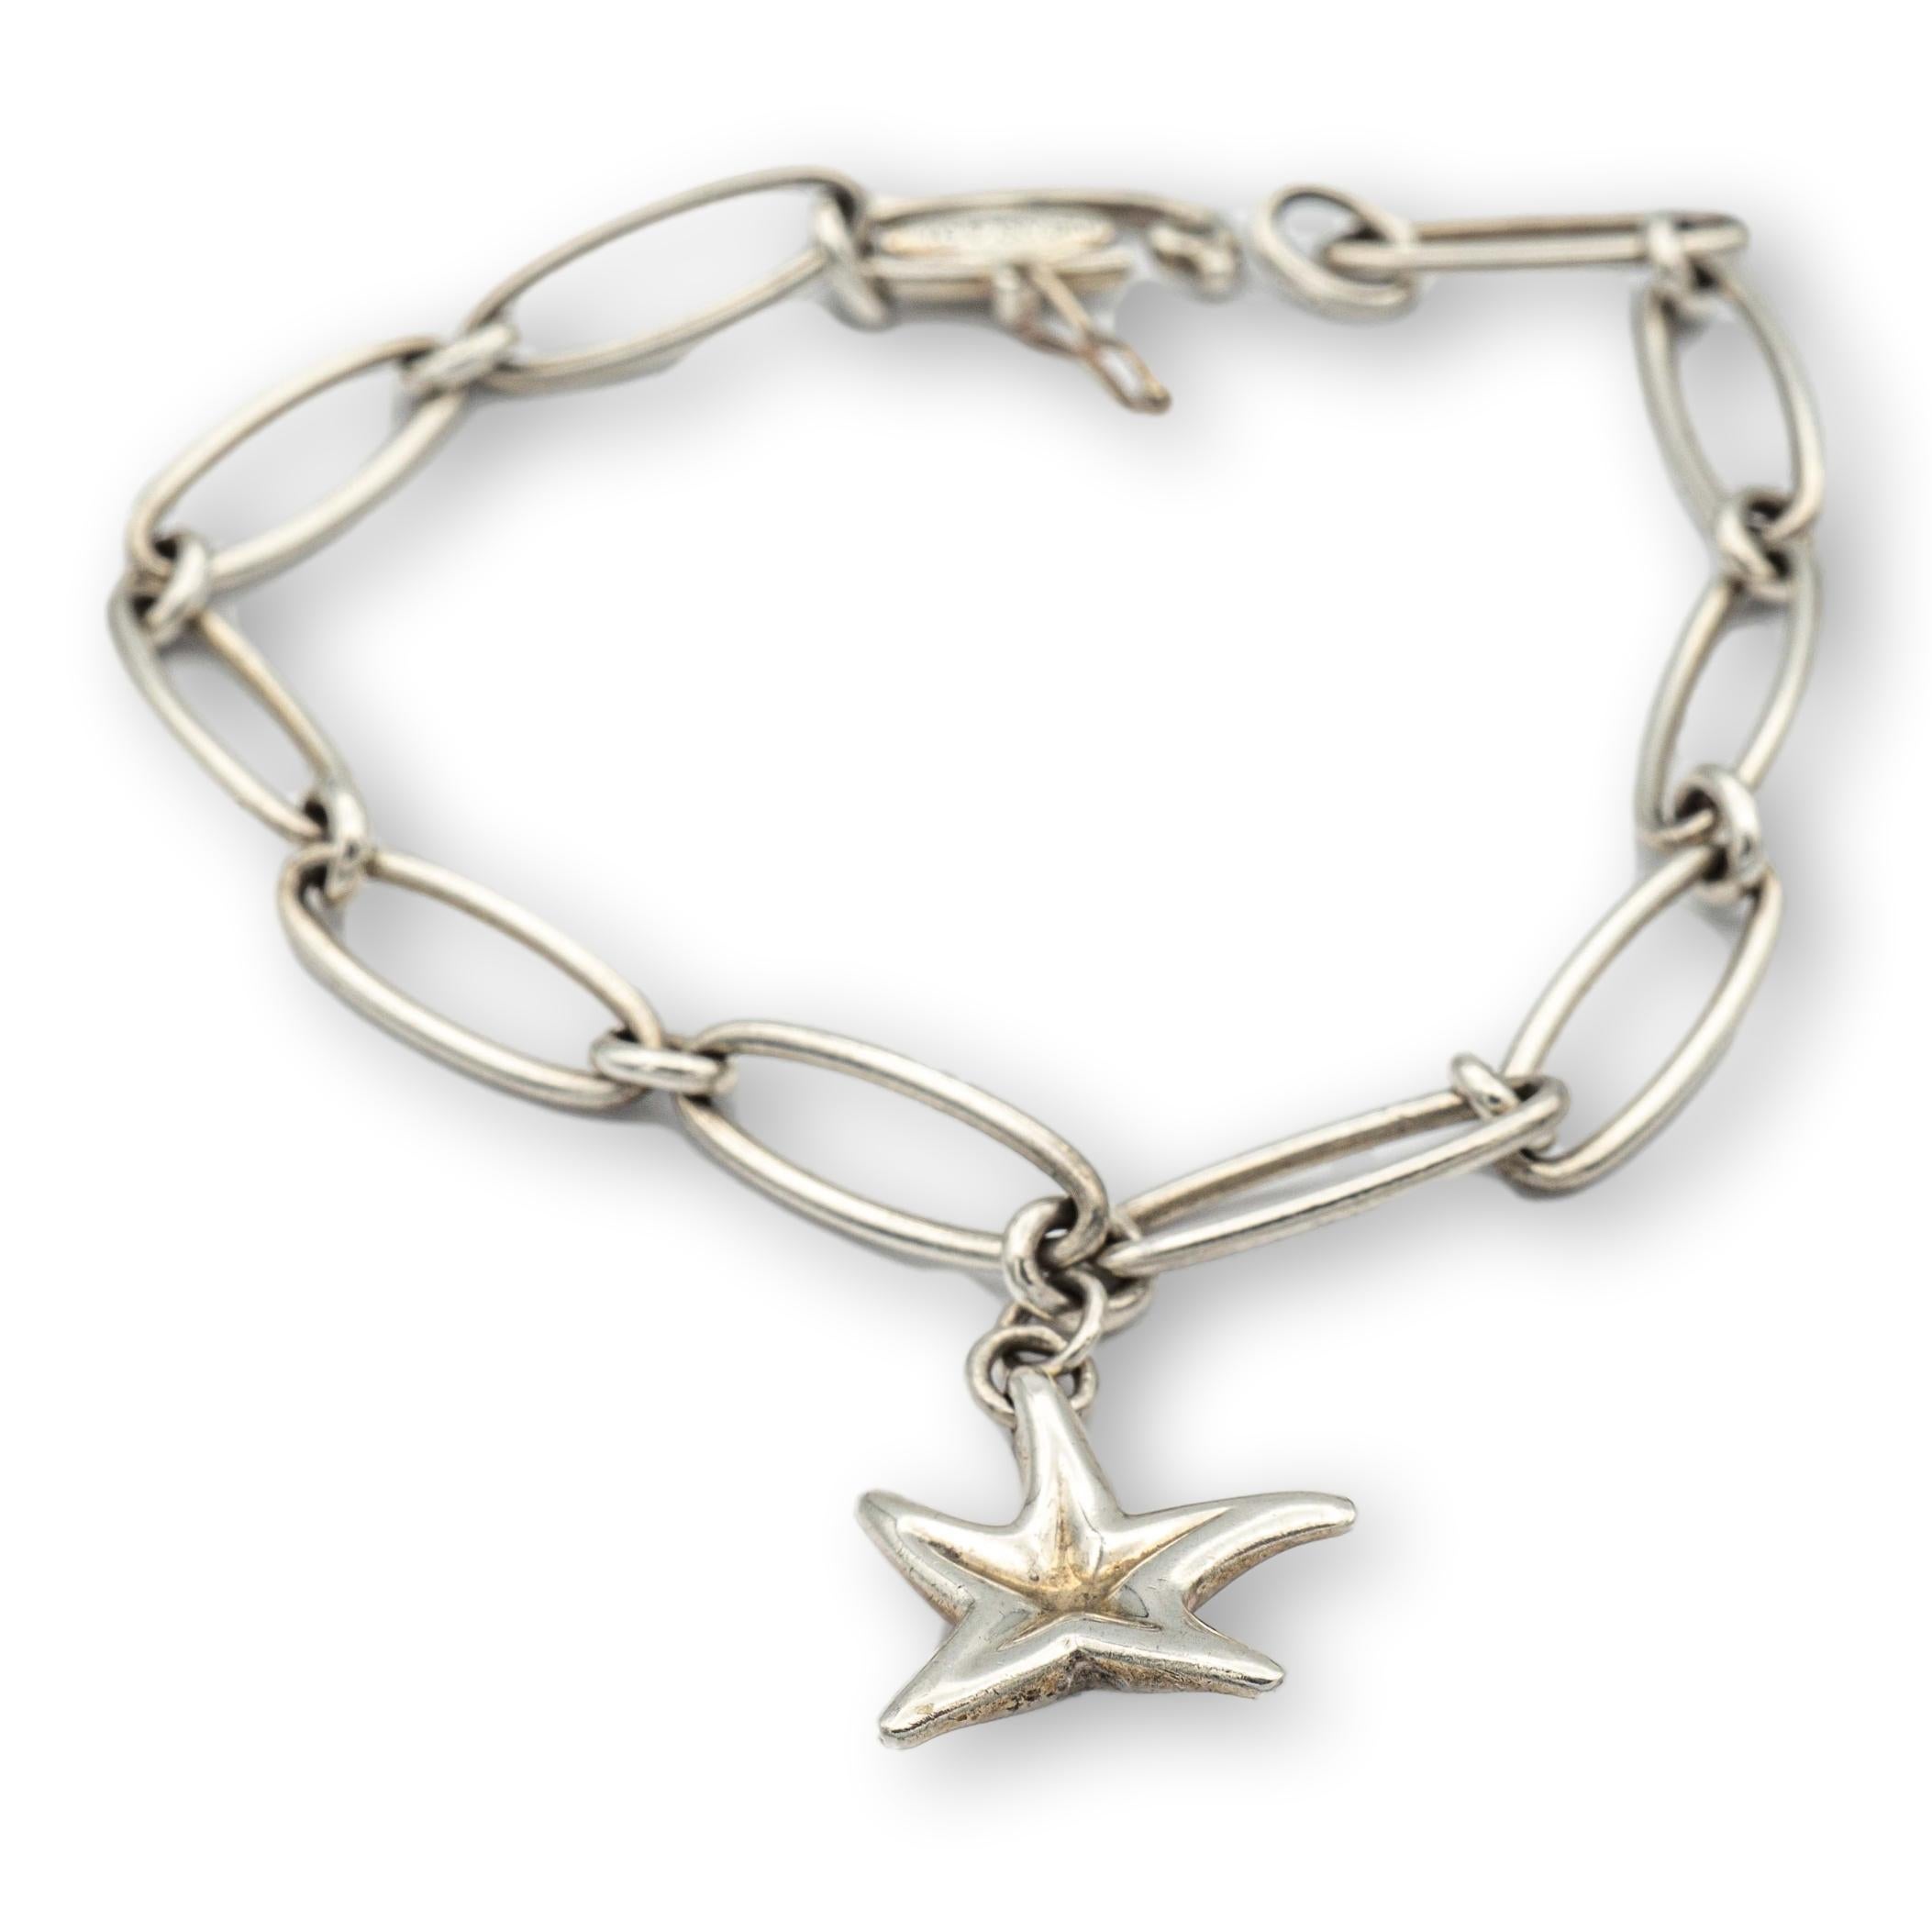 Tiffany & Co. bracelet finely crafted in sterling silver with starfish charm hanging off a large link bracelet that measures 7.5 